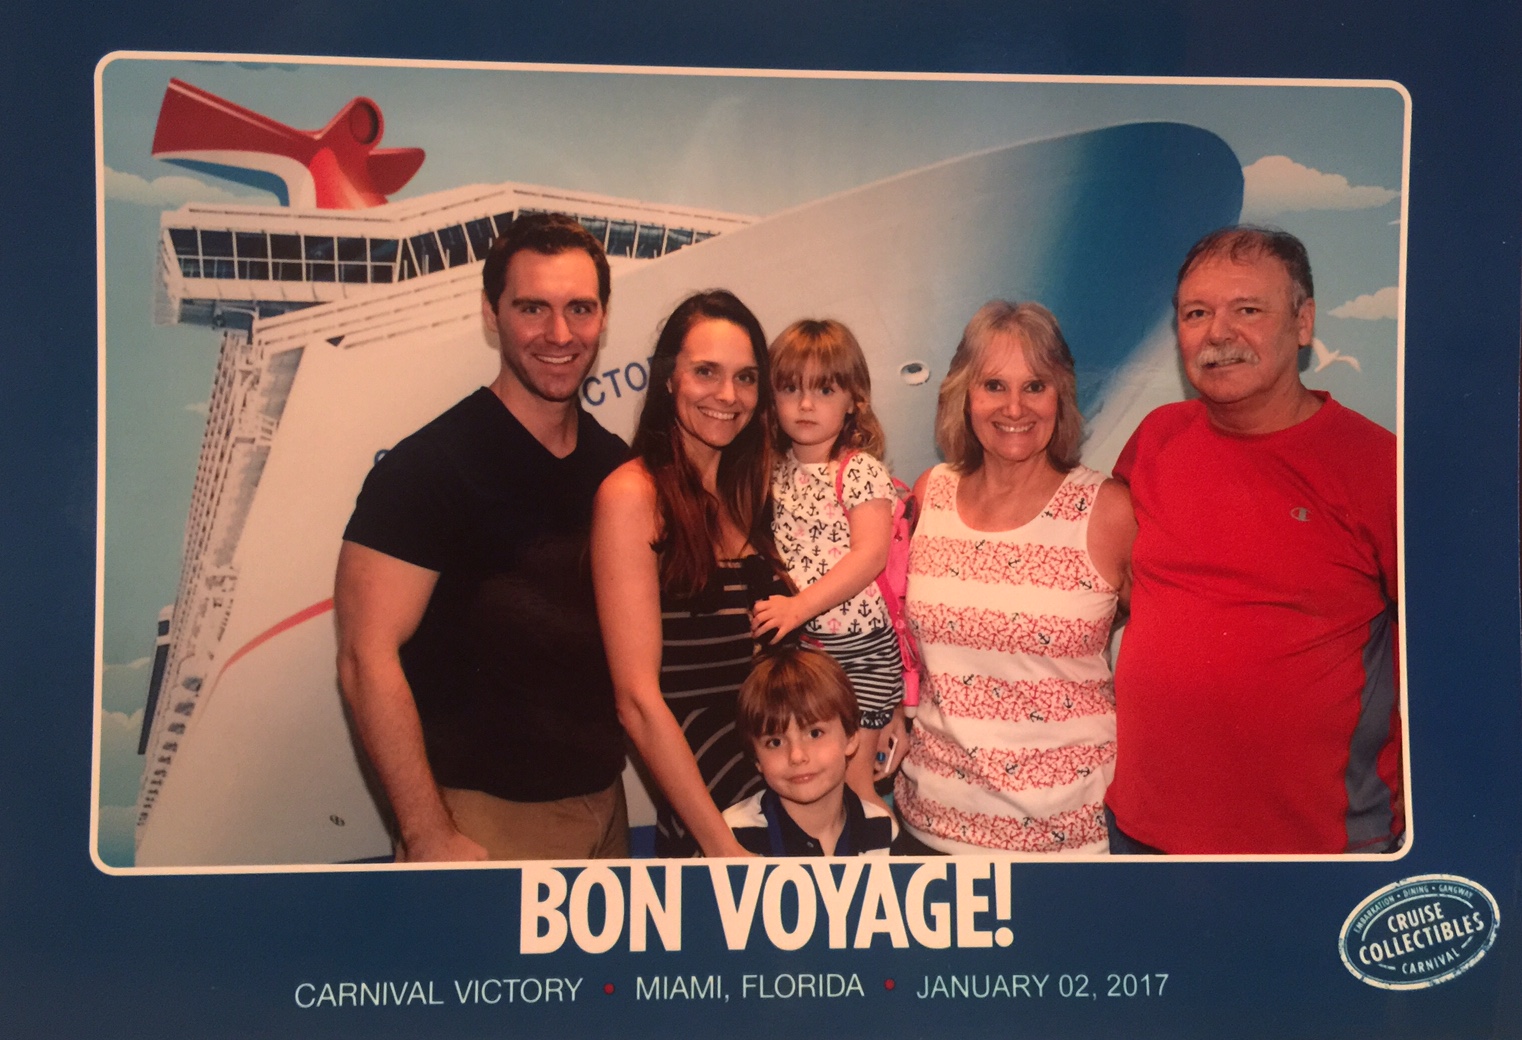 Carnival family cruise aboard the Carnival Victory